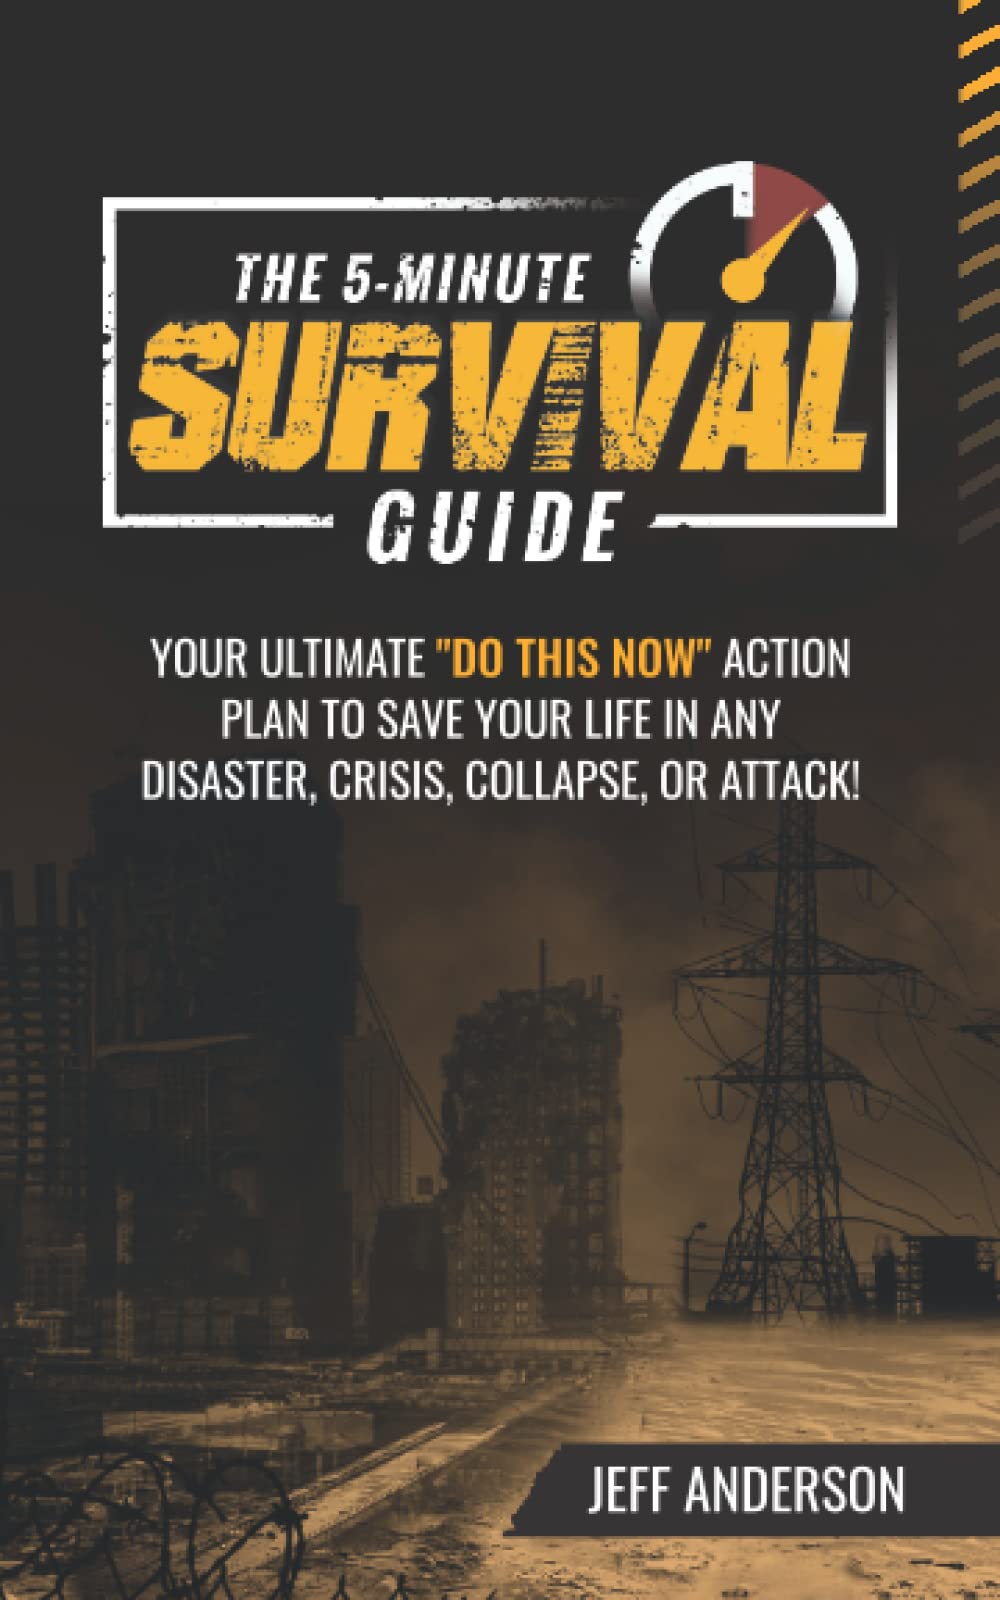 The 5-Minute Survival Guide: Your Ultimate “Do This Now” Action Plan To Save Your Life In Any Disaster, Crisis, Collapse, Or Attack